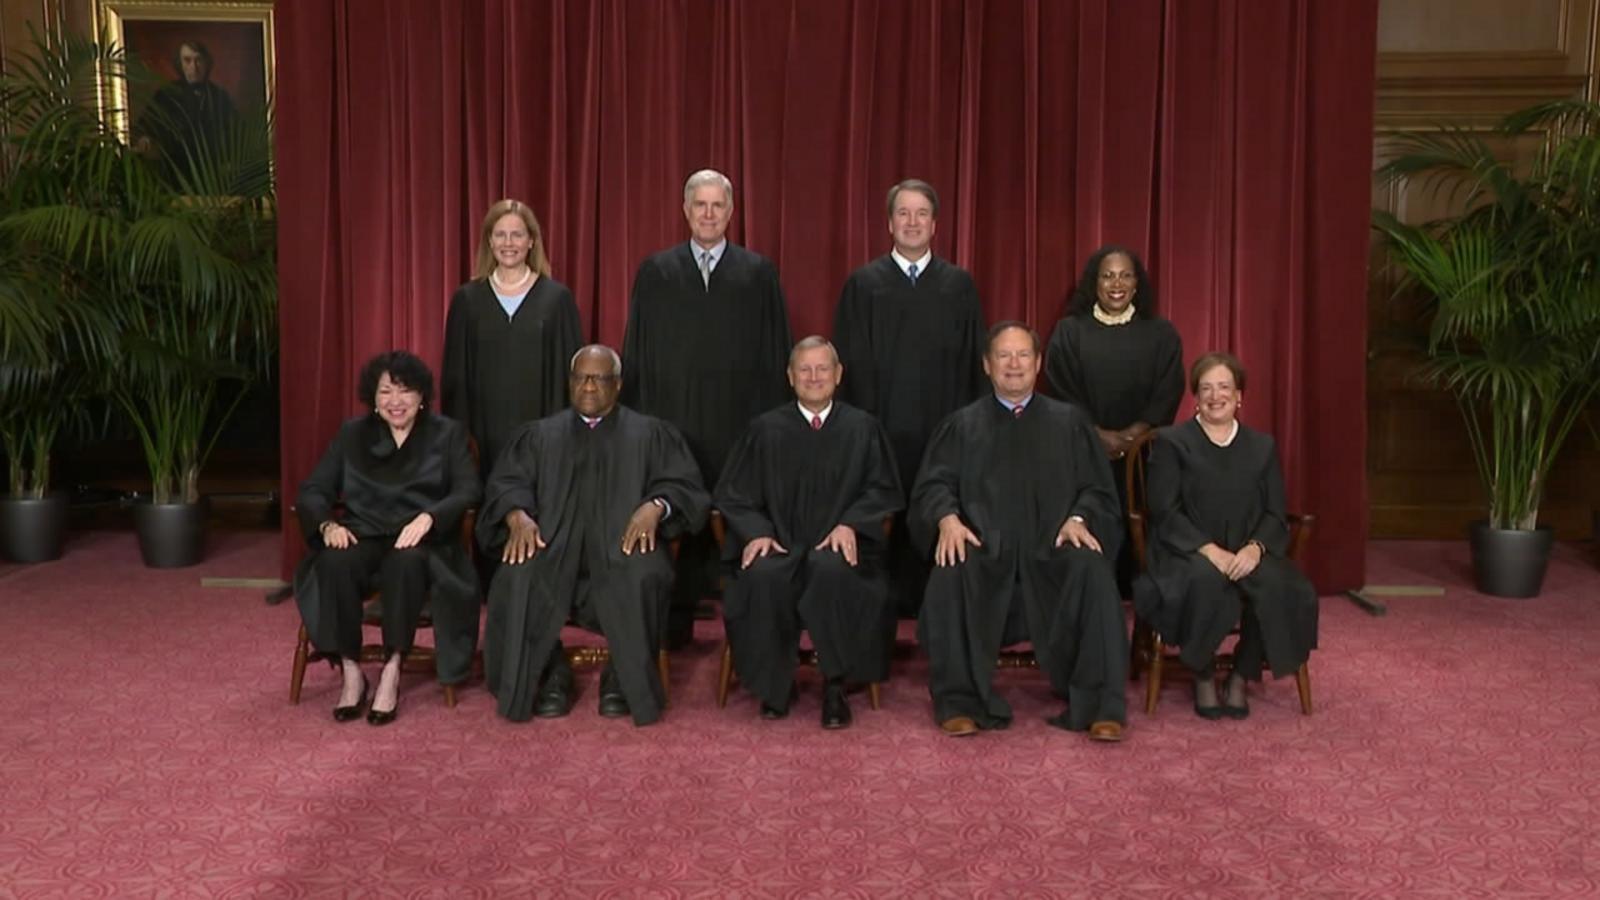 VIDEO: Supreme Court justices hear historic case on presidential immunity